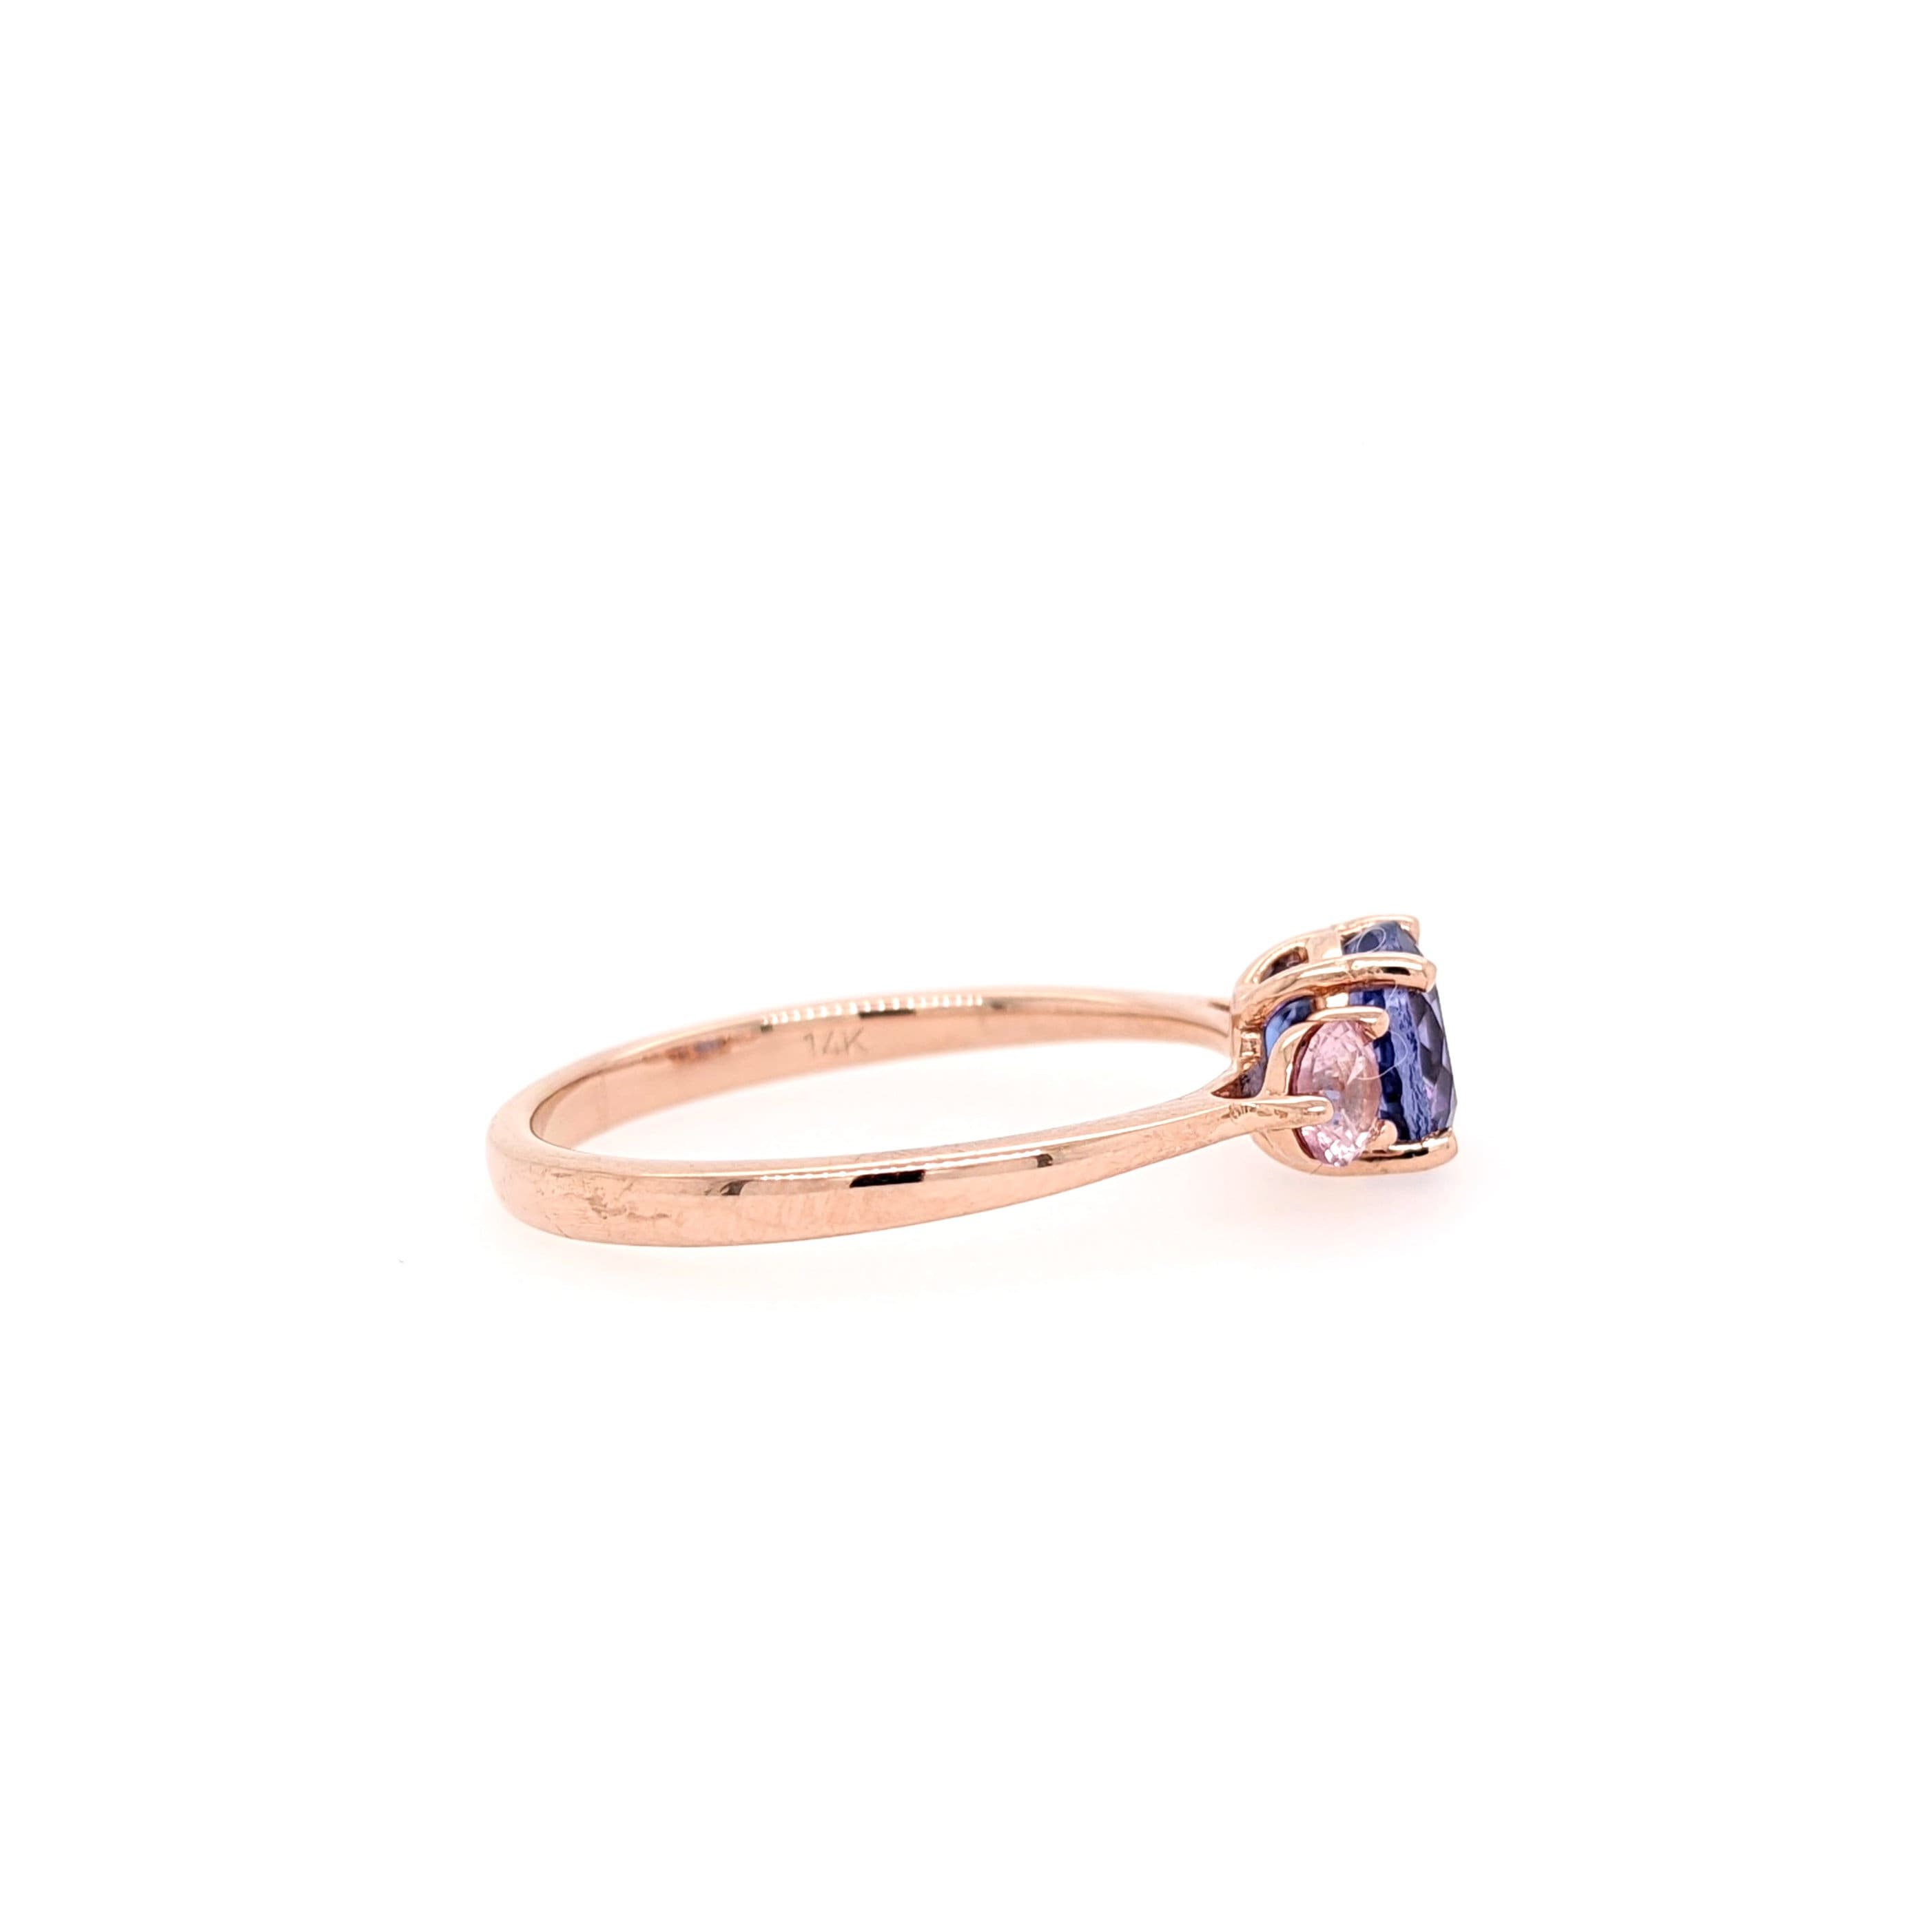 Tanzanite and Pink Sapphire Ring in 14K Rose Gold | Three Stone Ring | Round 6mm | Blue and Pink Natural Gemstones | One of a Kind | For Her